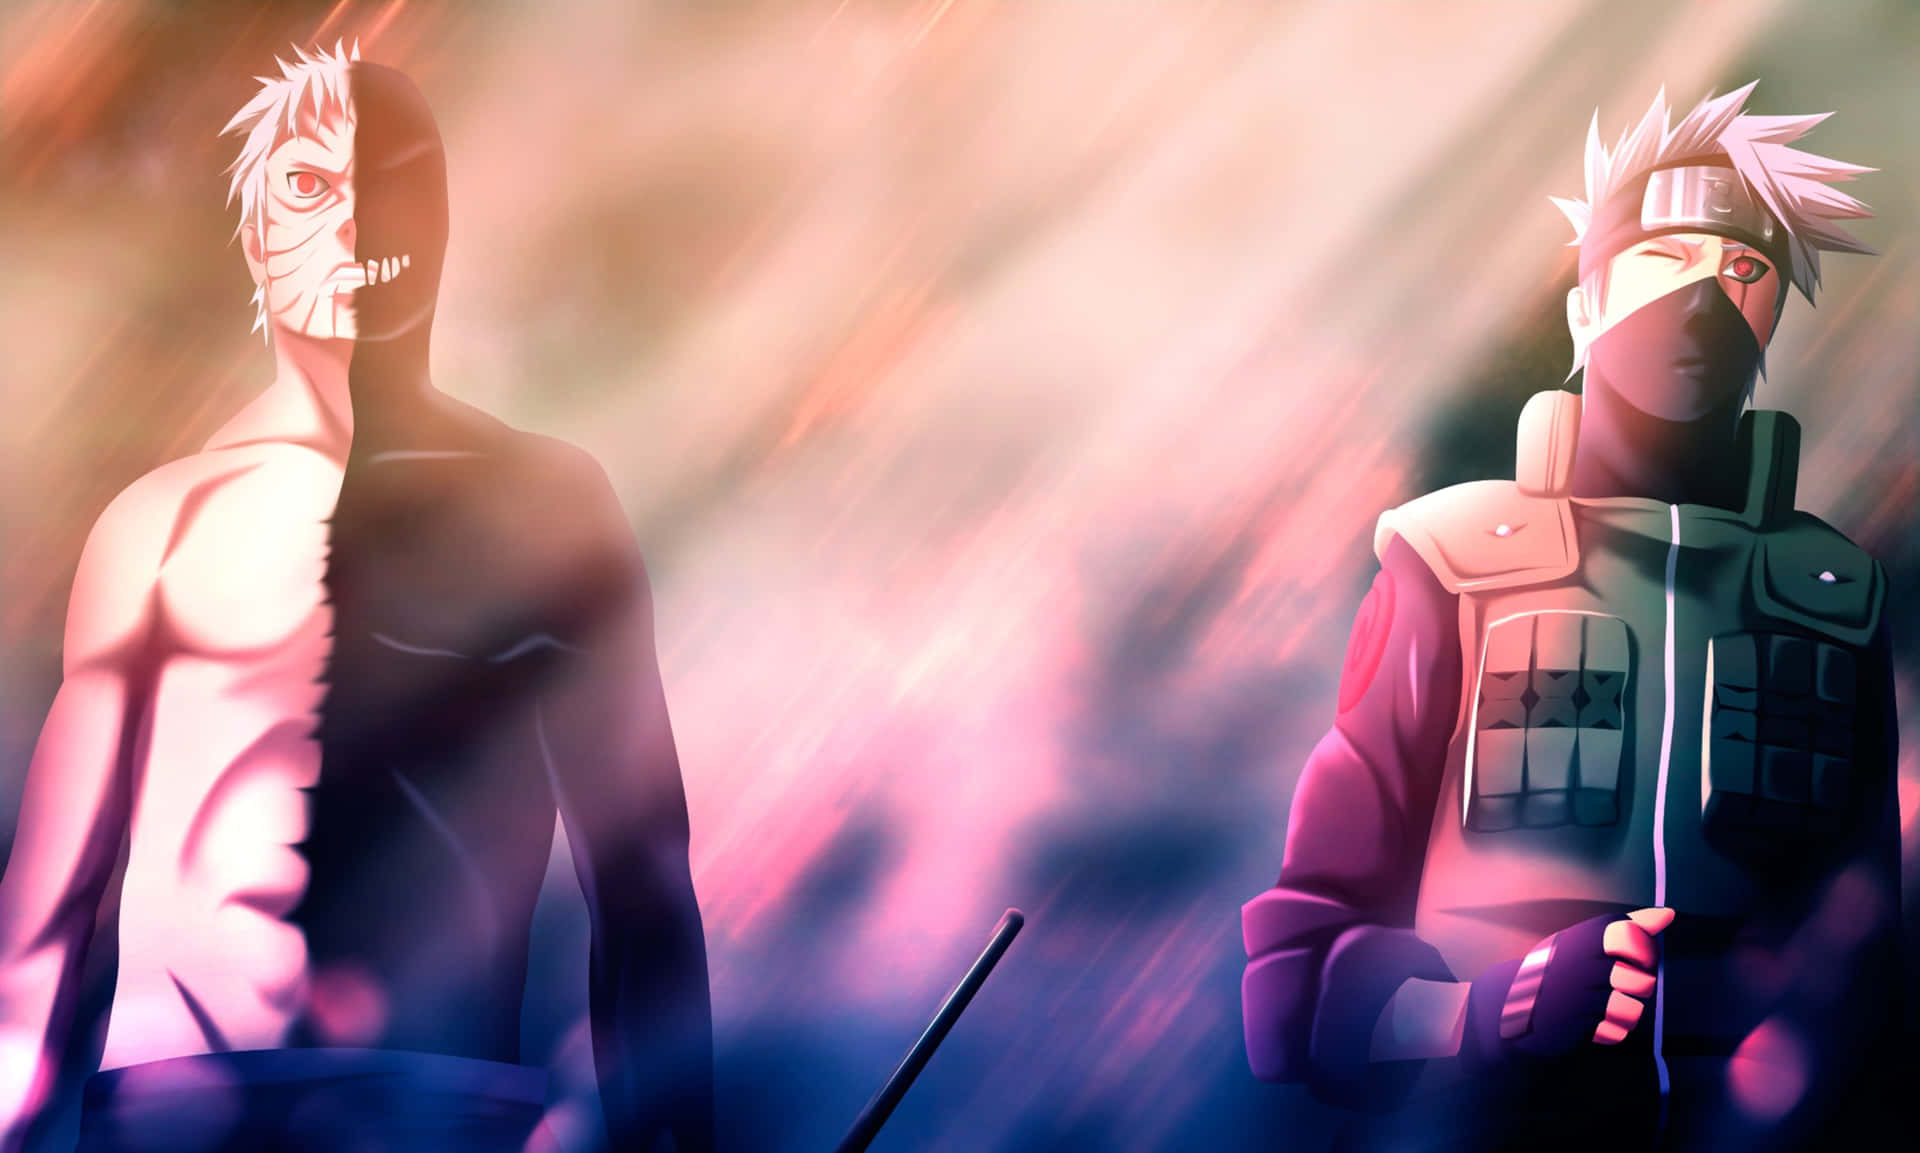 The bond of friendship between Kakashi and Obito never breaks. Wallpaper